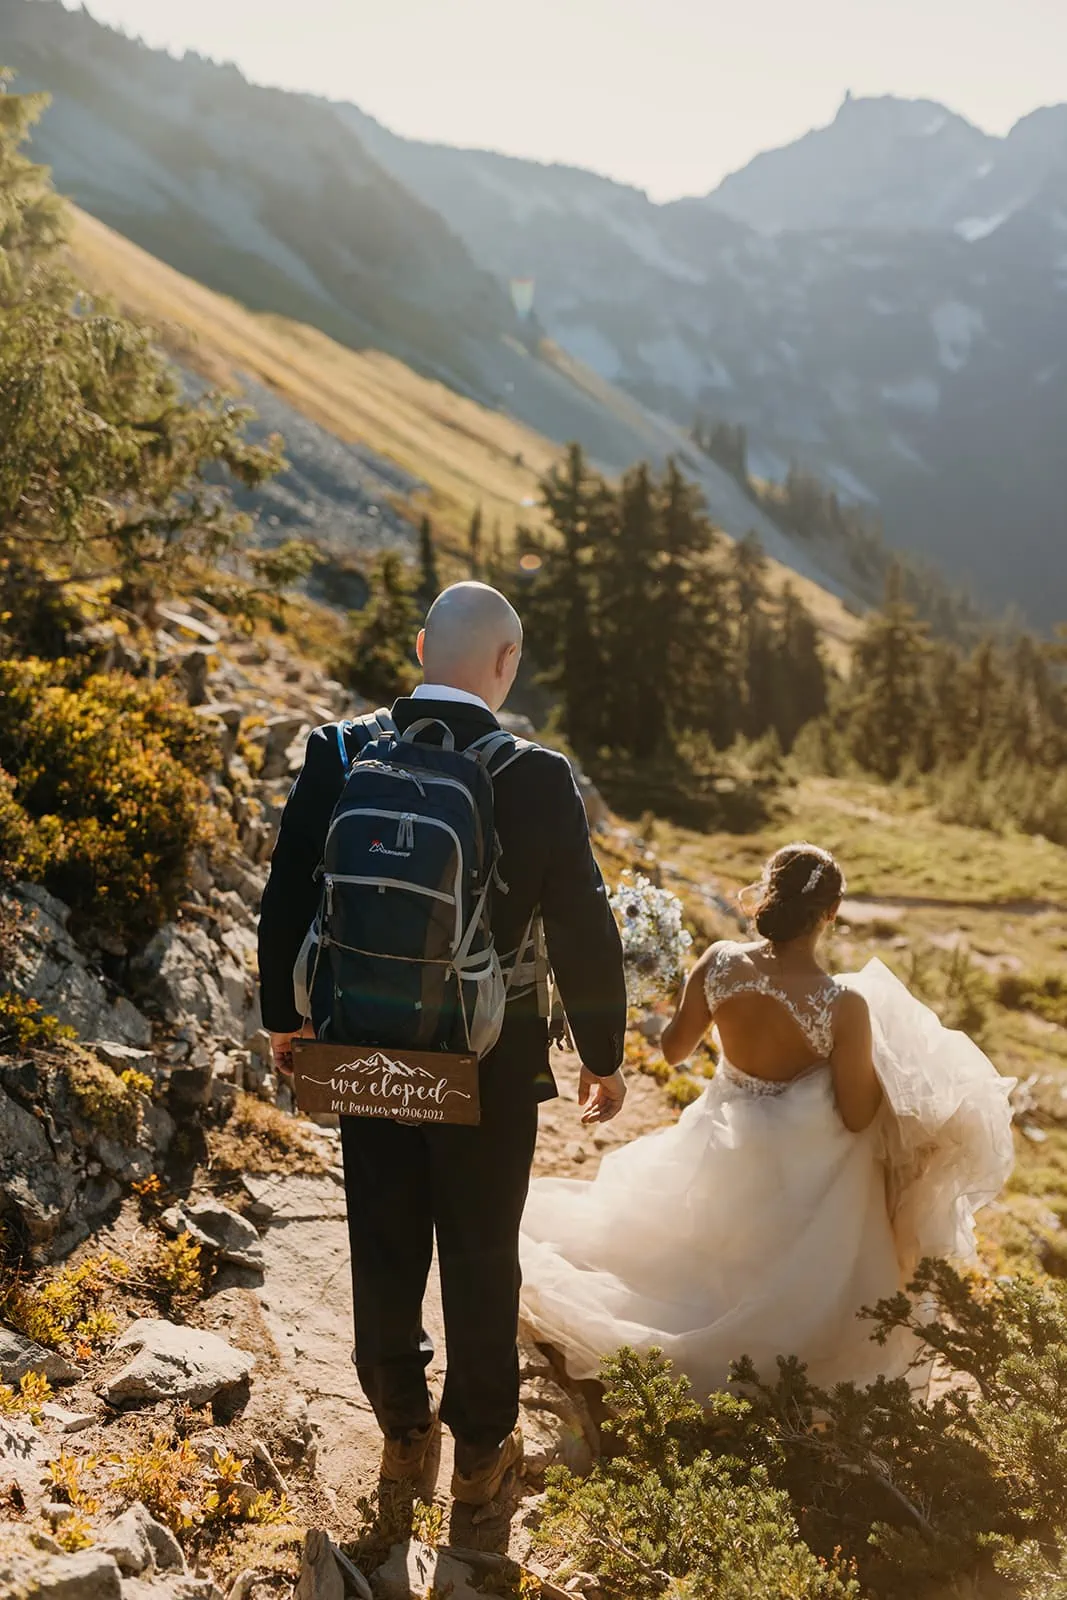 A couple just married hike down the mountain together.